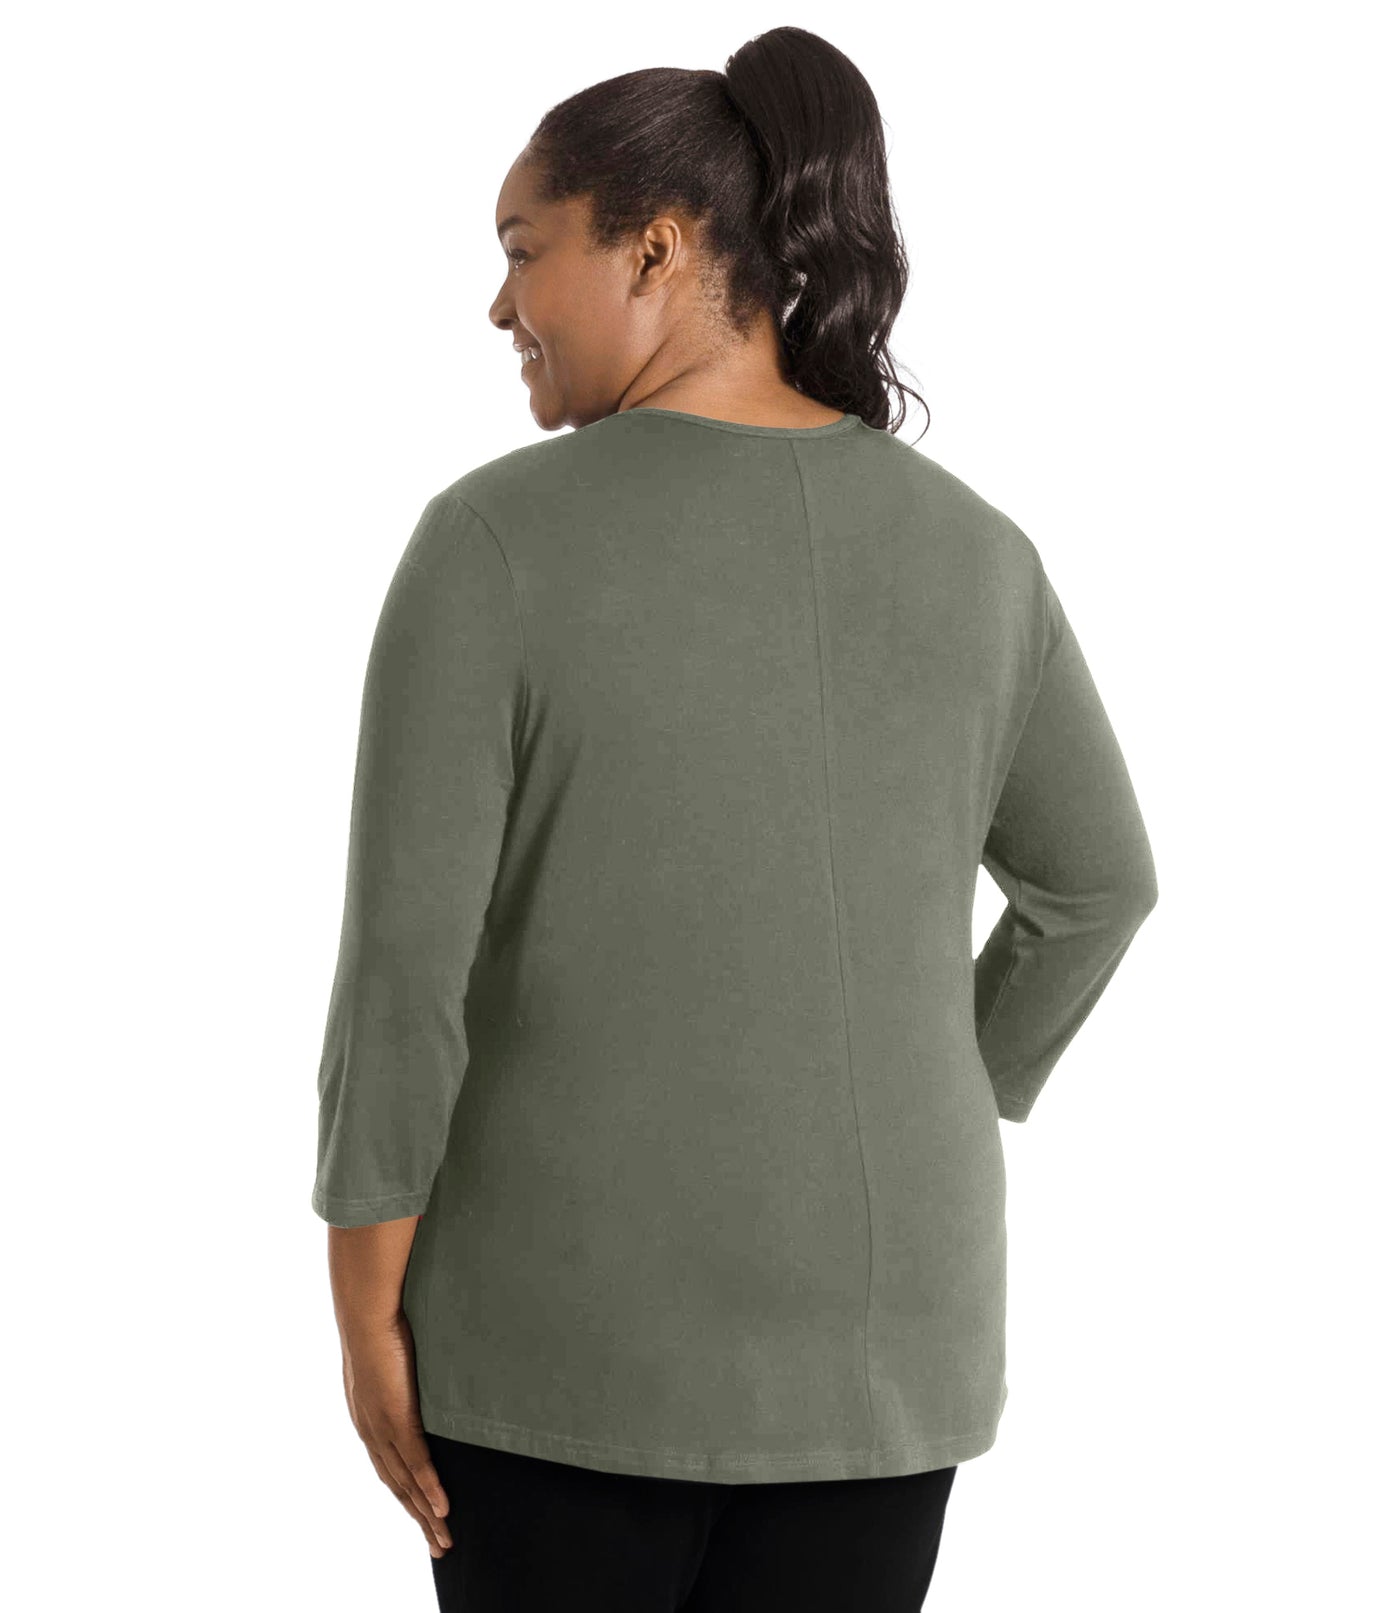 Plus size woman, facing back, wearing JunoActive’s Stretch Naturals Center Seam Scoop Neck 3/4 sleeve top in color moss green. Hands are by side. Pants are in color black. 